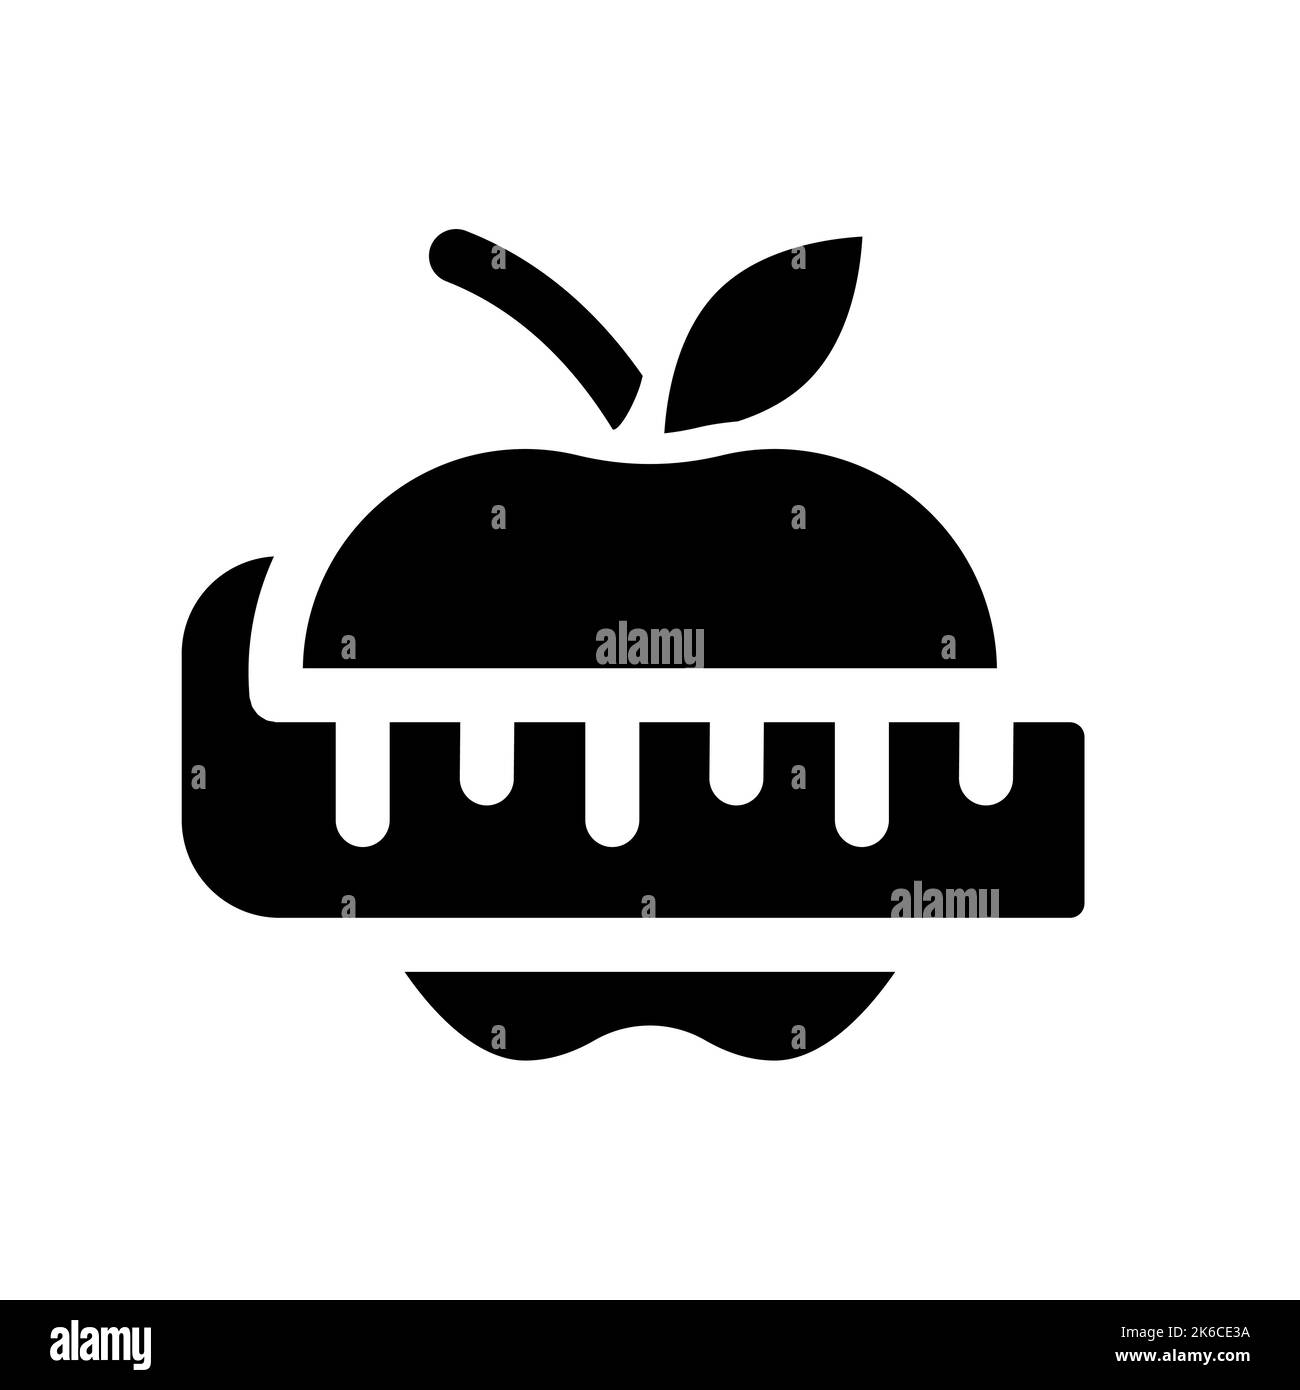 Apple measure app Black and White Stock Photos & Images - Alamy